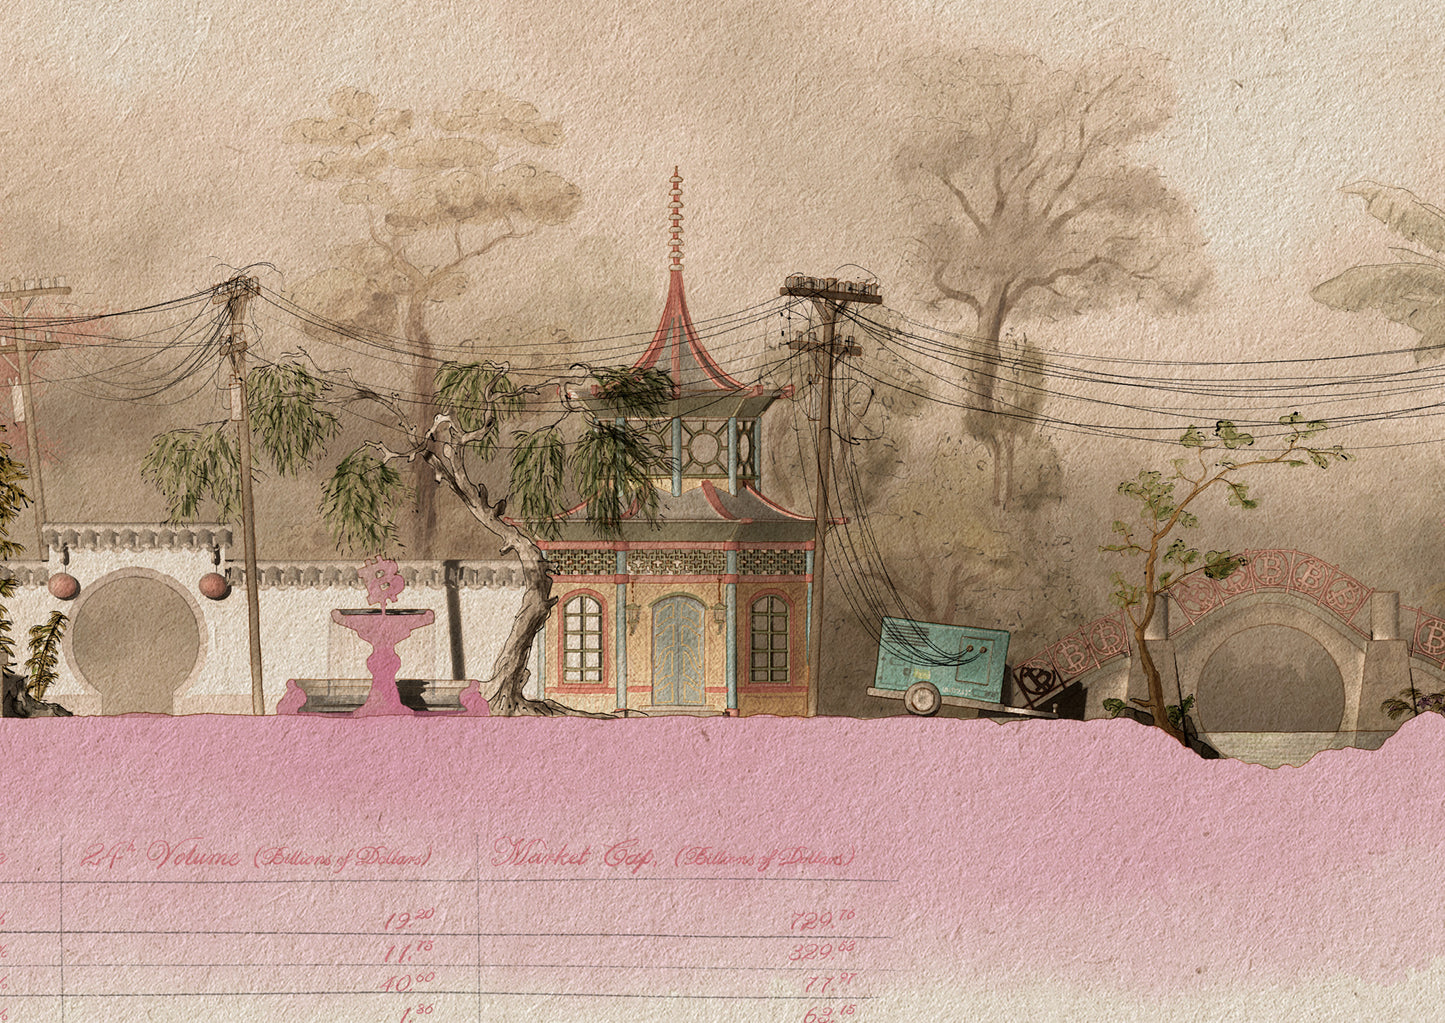 A Bitcoin Mine (in the Chinoiserie Style)